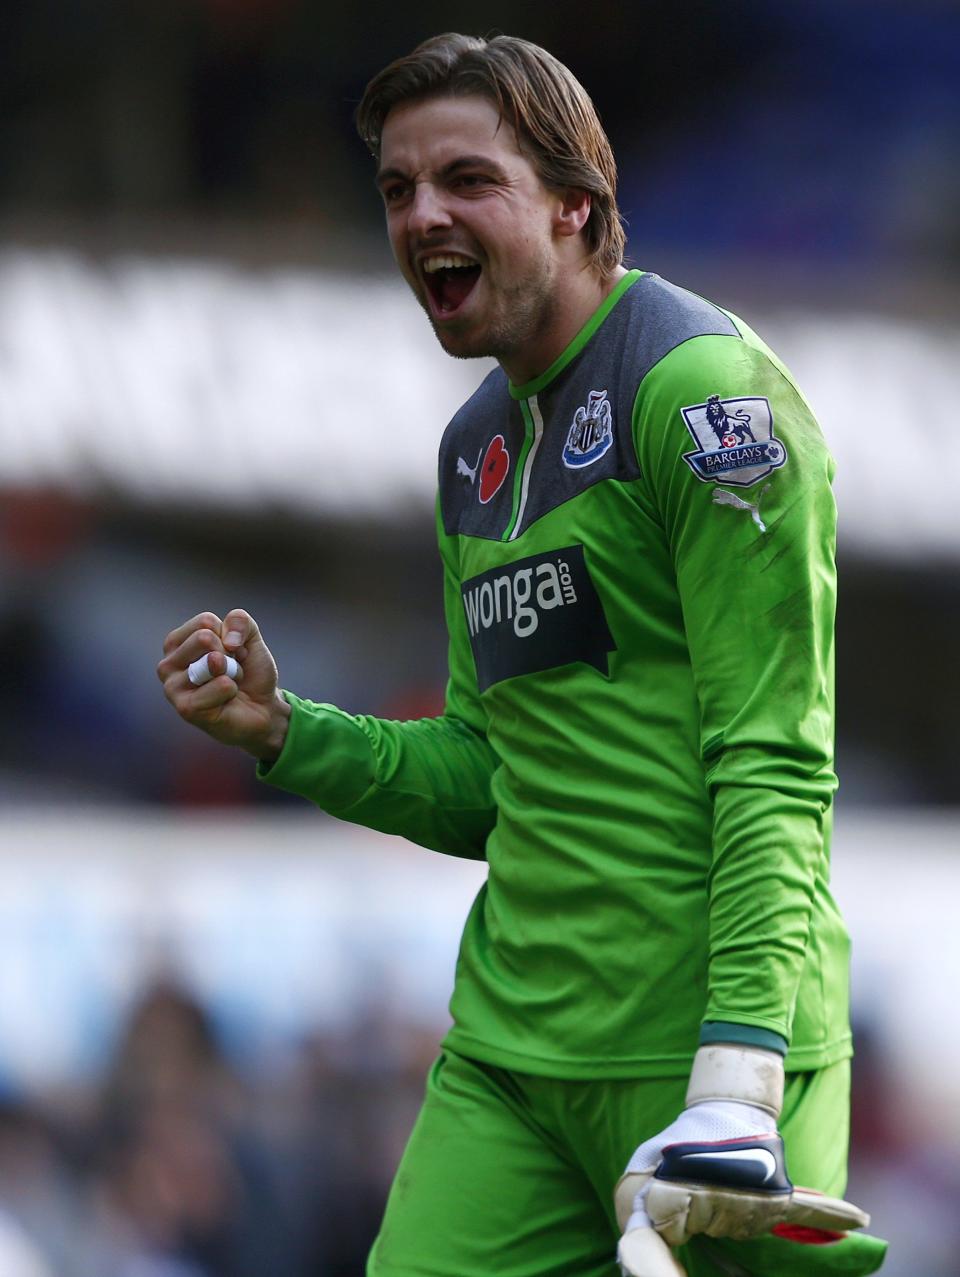 Newcastle United's goalkeeper Tim Krul celebrates after beating Tottenham Hotspur in their English Premier League soccer match at White Hart Lane in London, November 10, 2013.